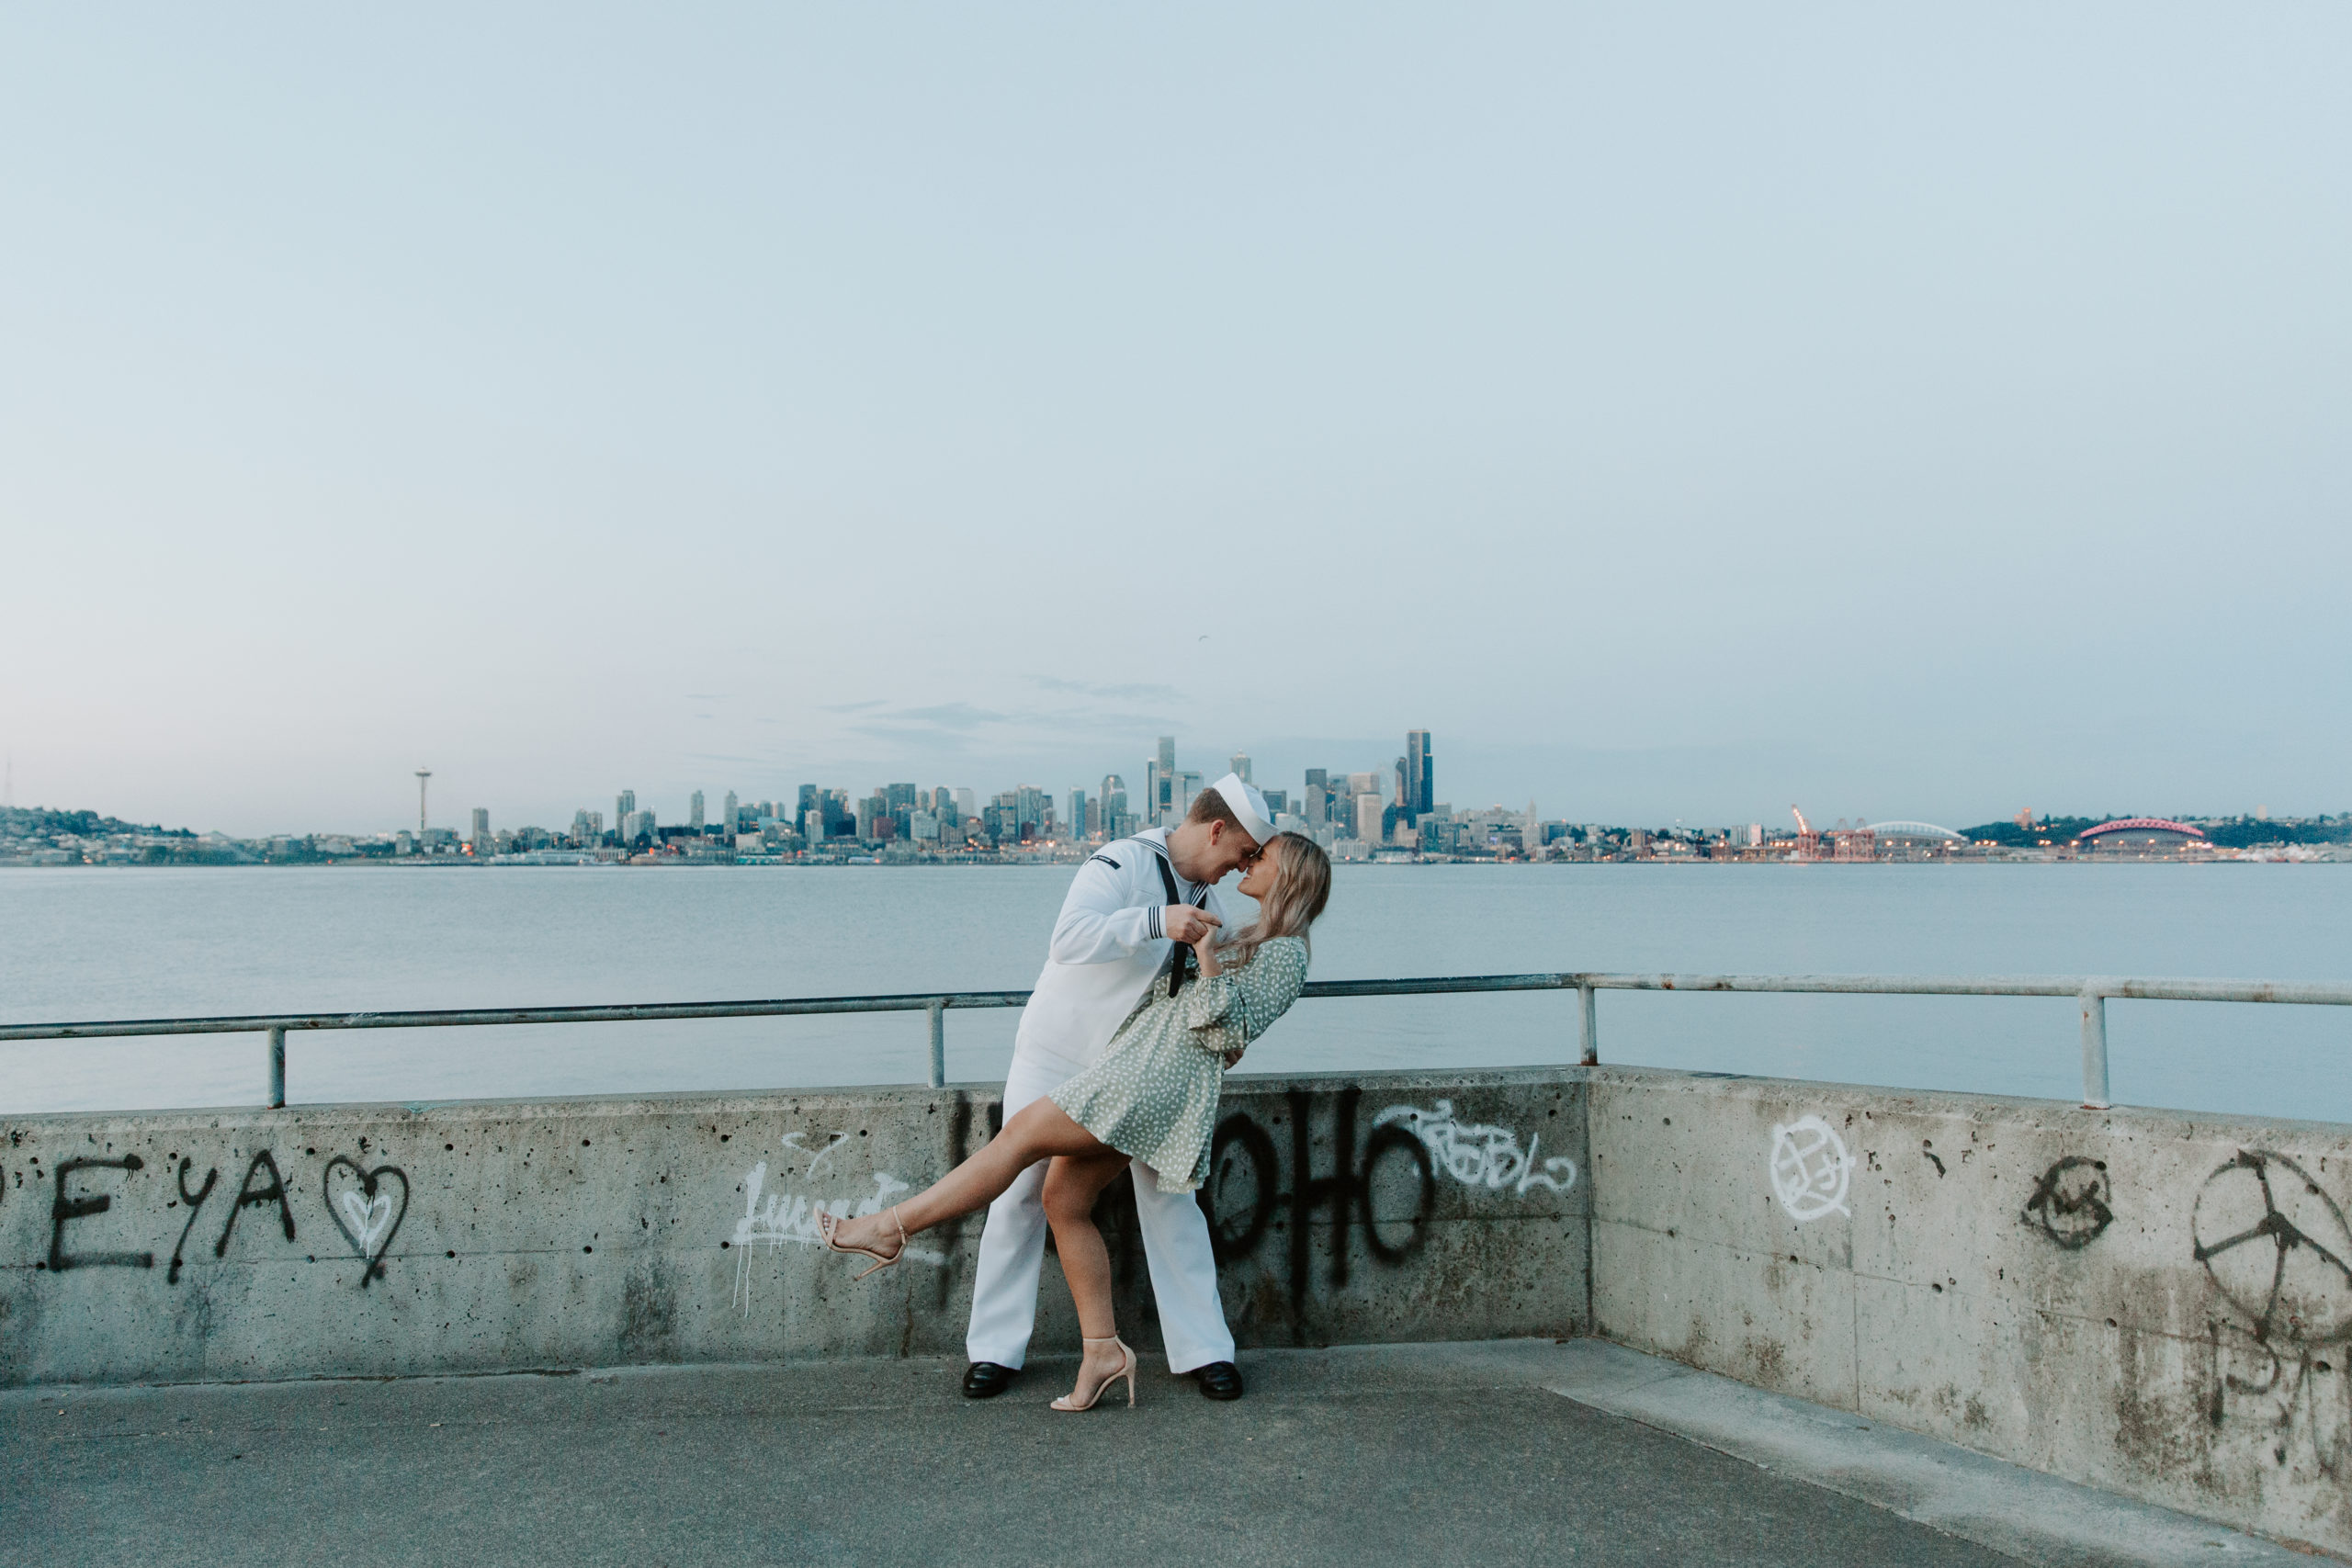 A couple standing on the edge of the water with the seattle skyline in the background as the man is dipping his partner and giving her a kiss during their Washington engagement photos